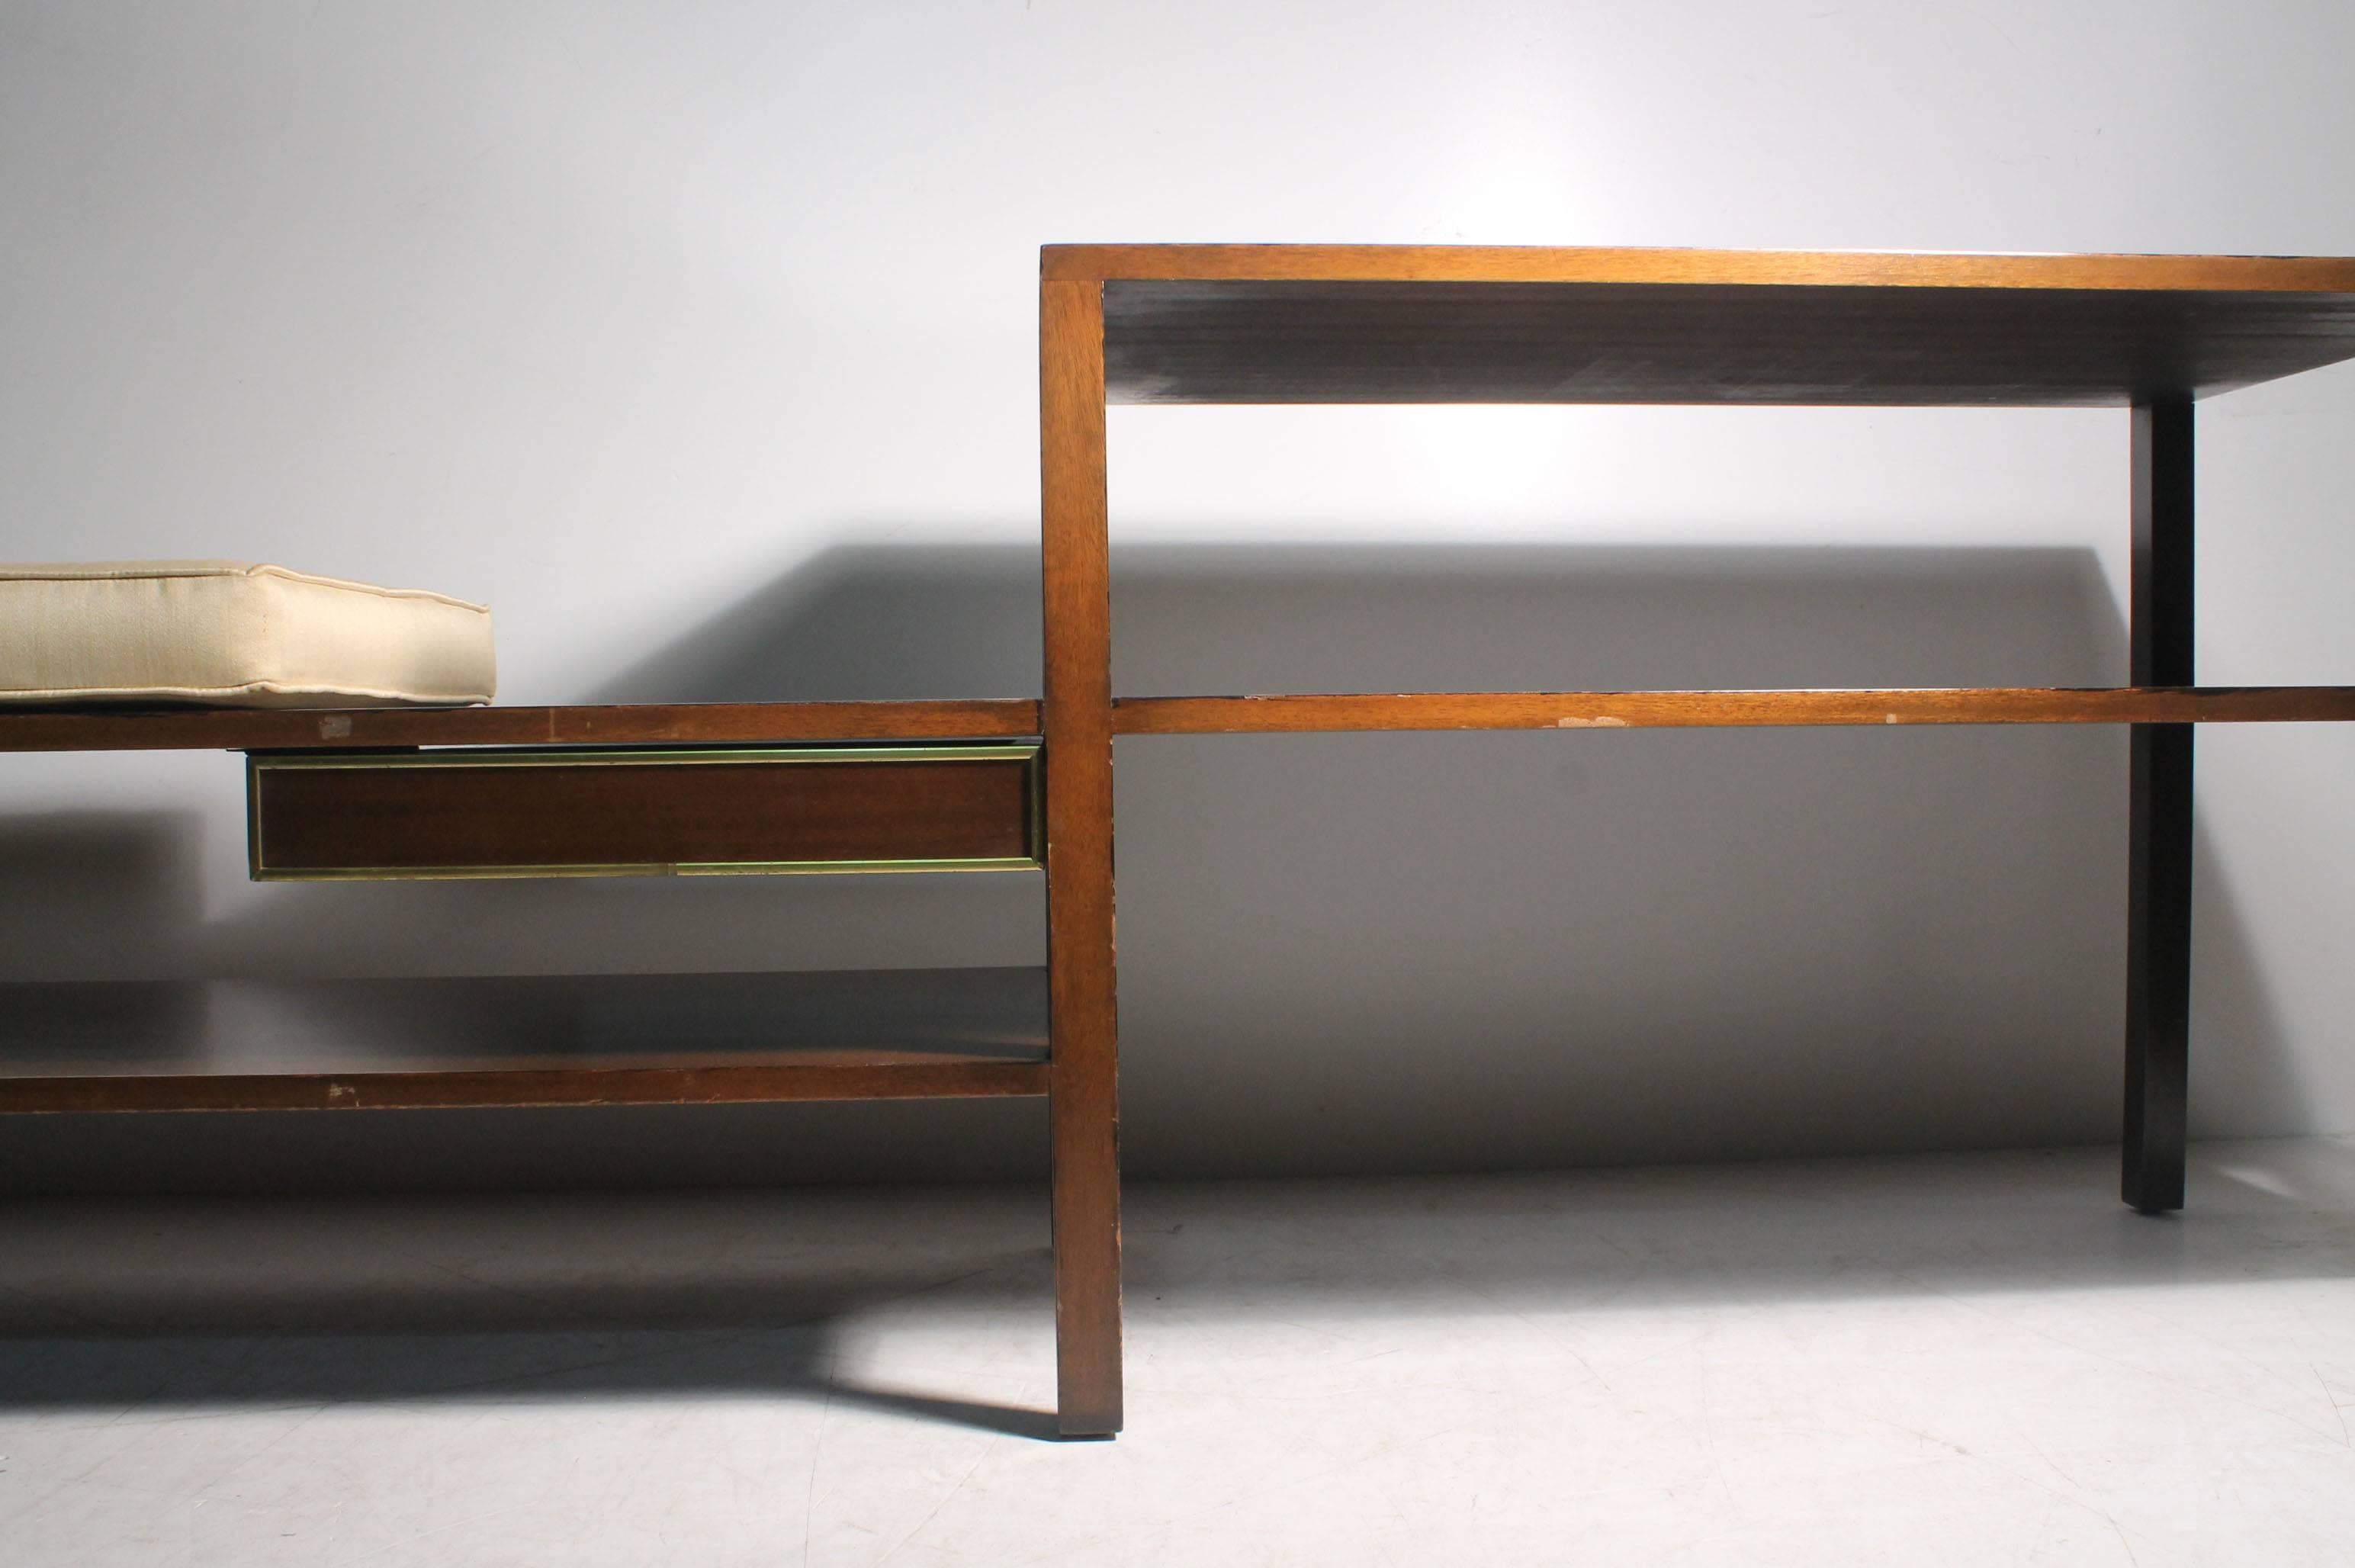 Elegant architectural Harvey Probber bench etagere. Very thoughtful in all of the proportions and placements of forms. A fine example of Harvey Probber work. Probber craftsmanship is that of Dunbar and he worked in the same vein as Edward